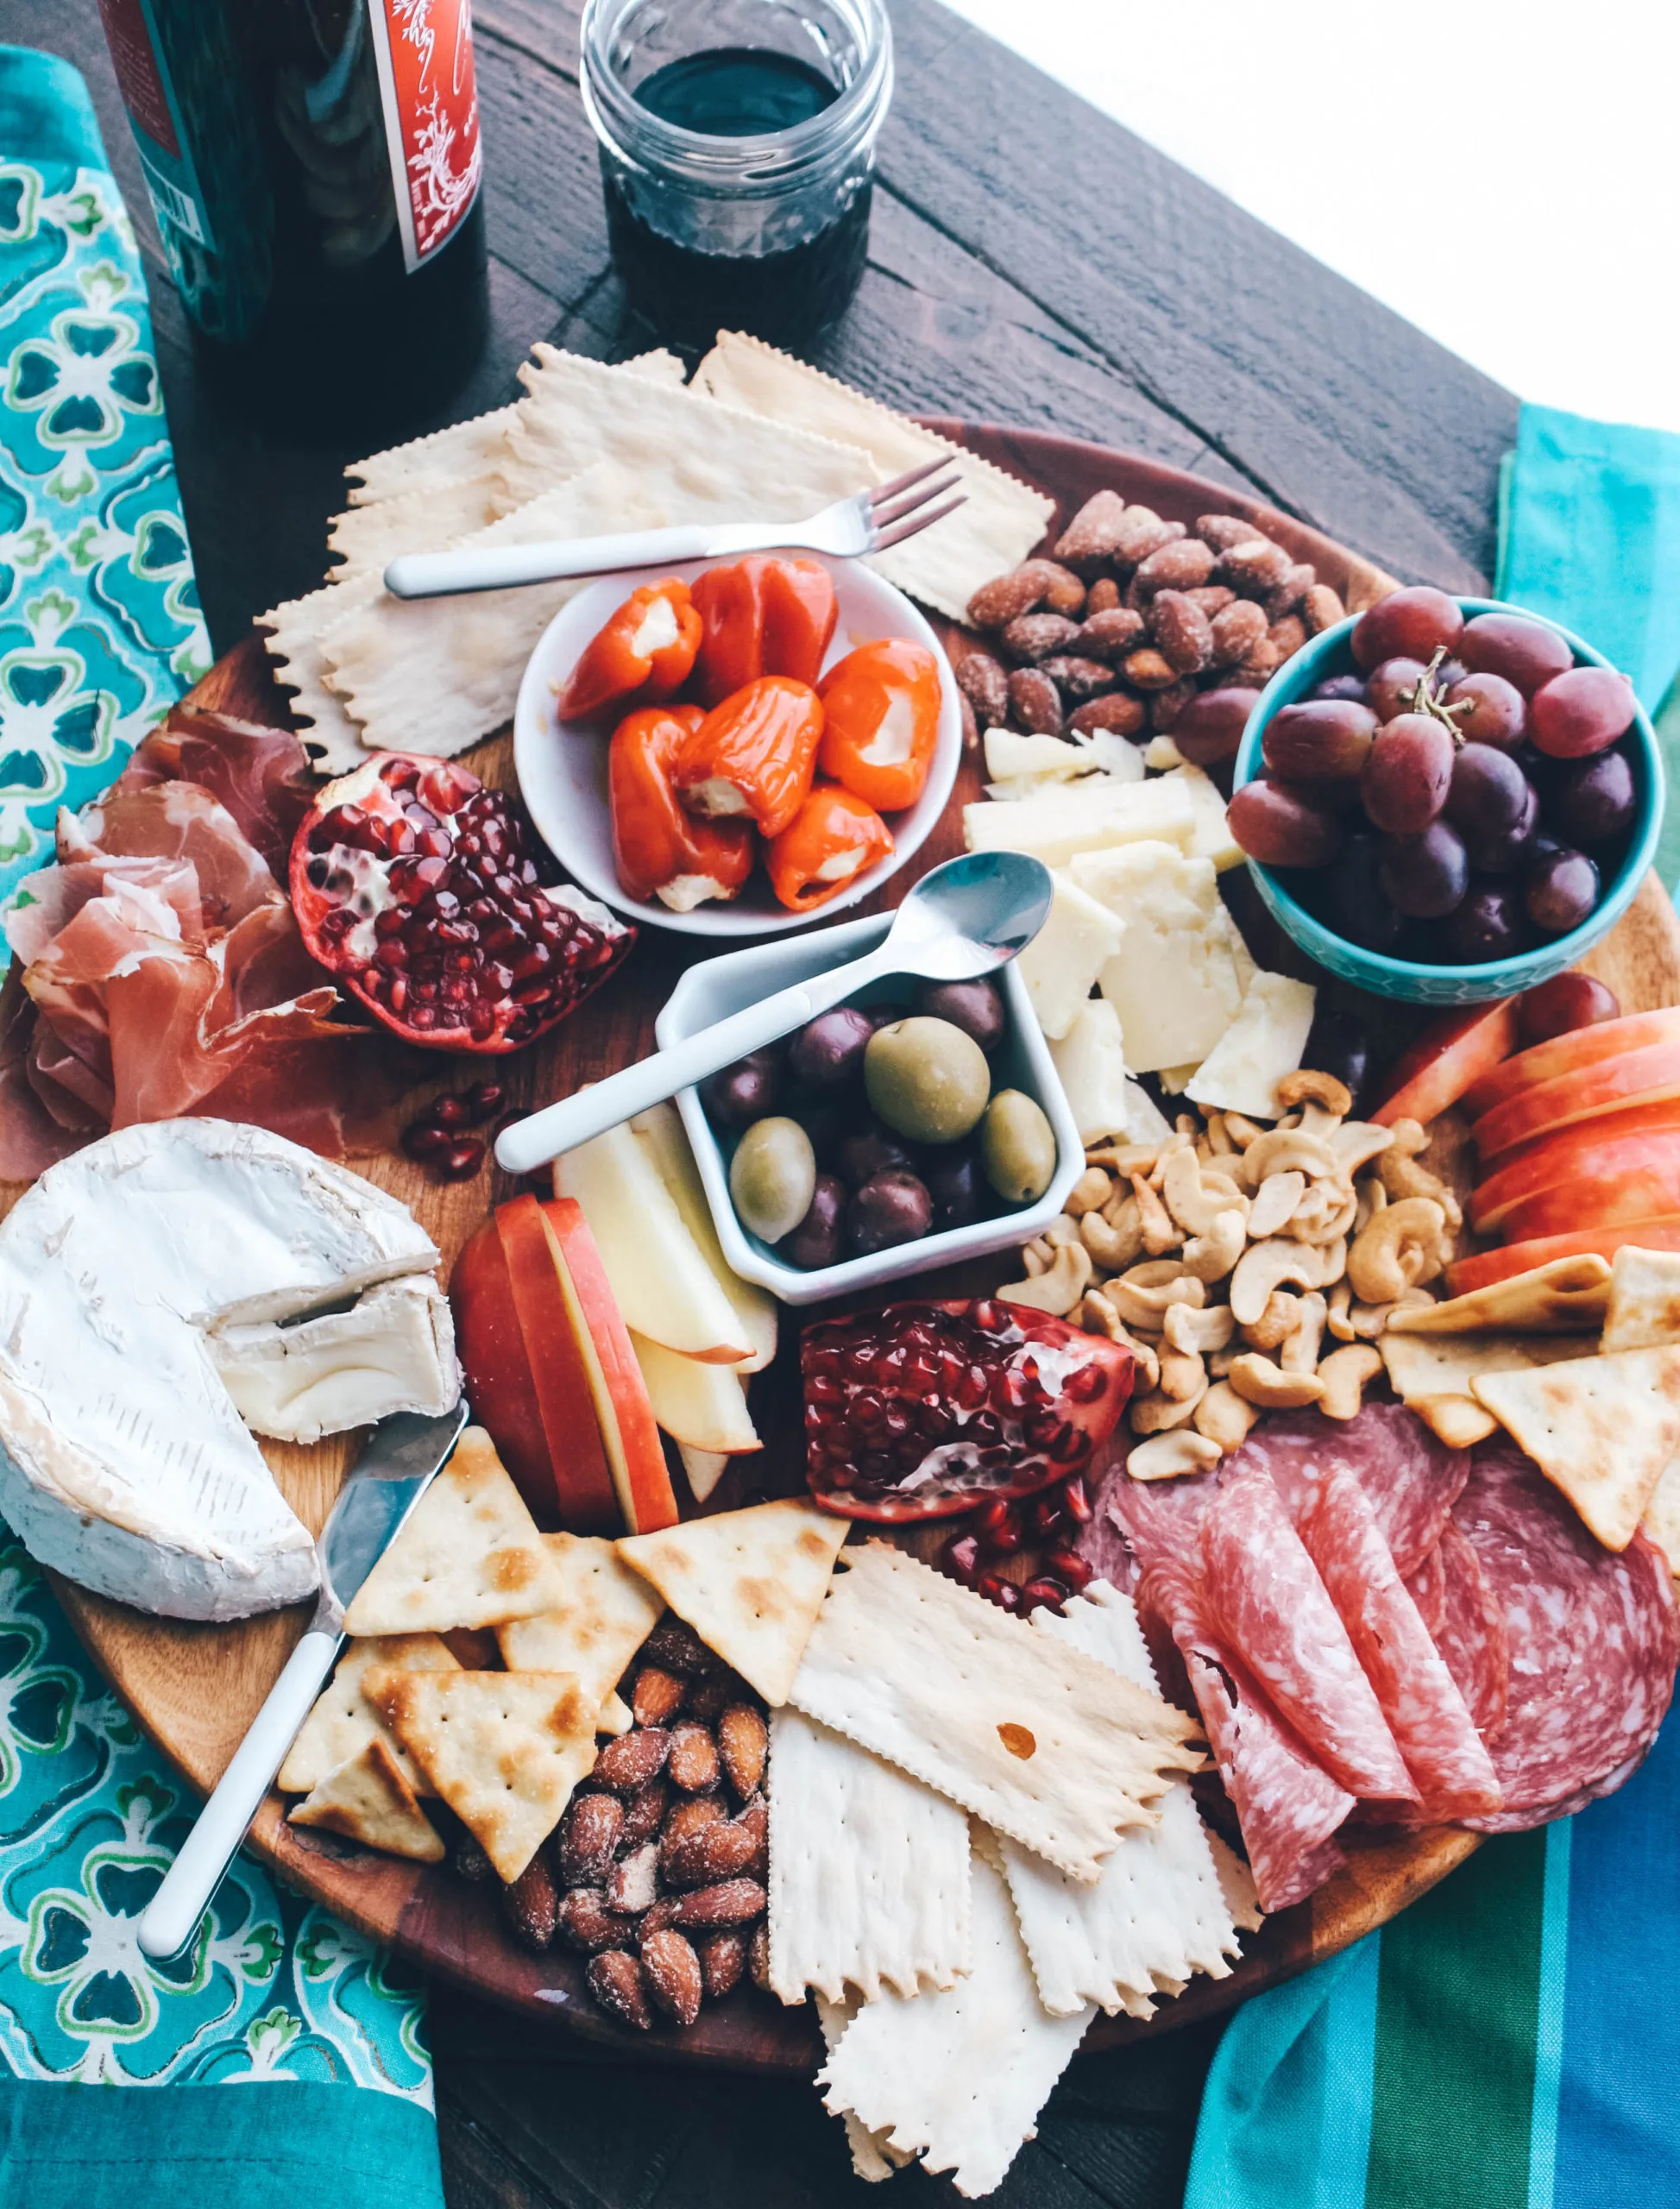 Let me show you how to make a fabulous charcuterie board!